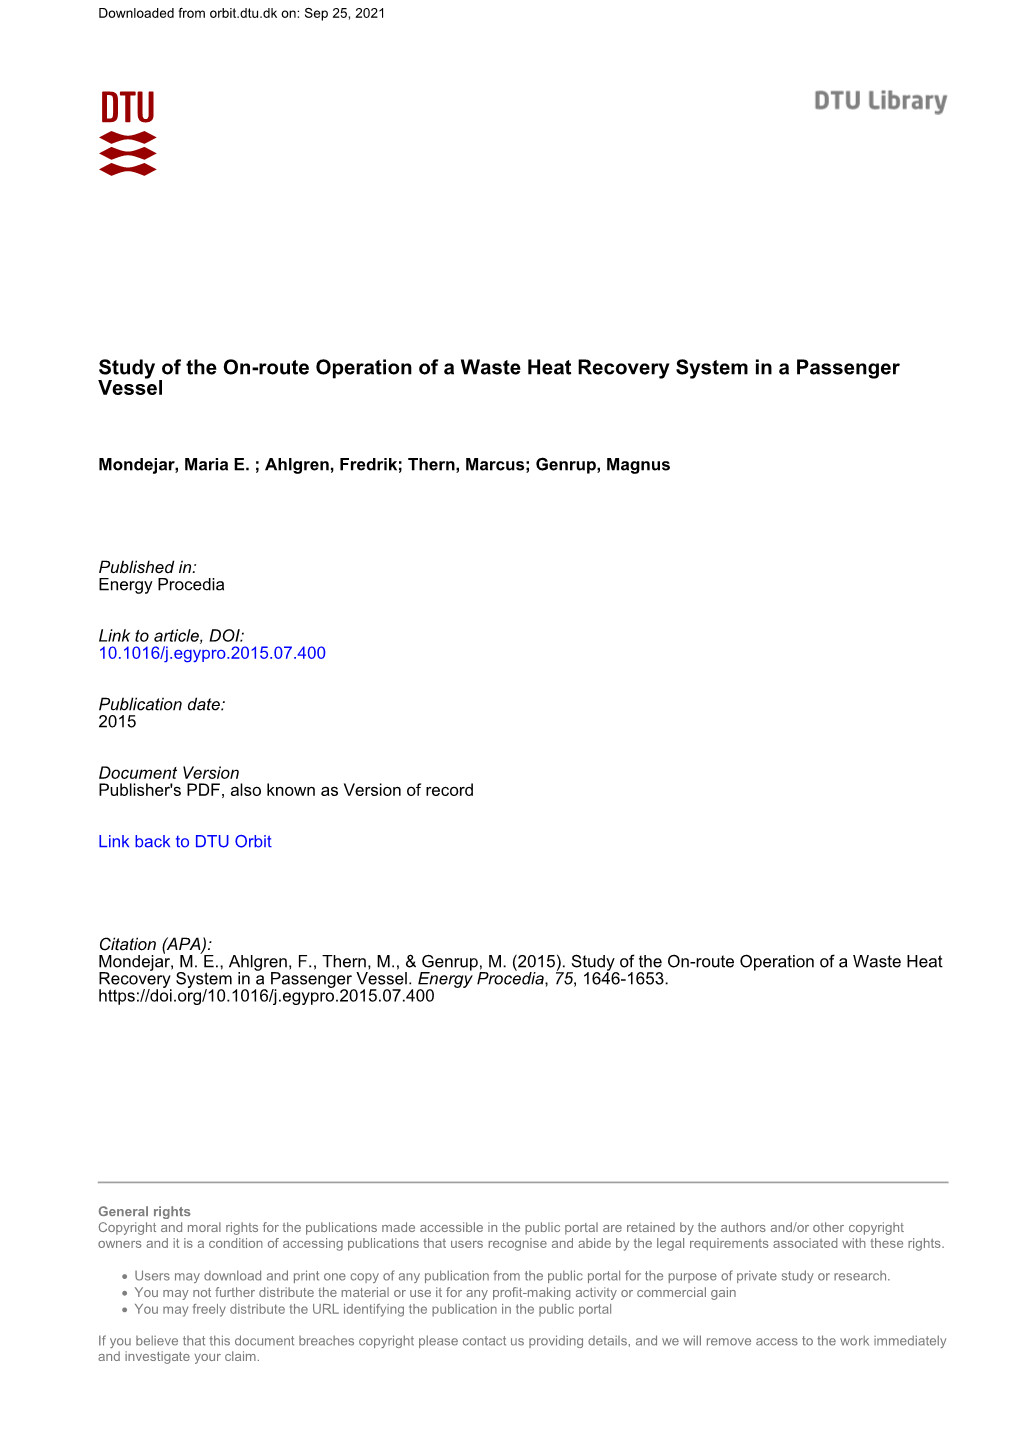 Study of the On-Route Operation of a Waste Heat Recovery System in a Passenger Vessel